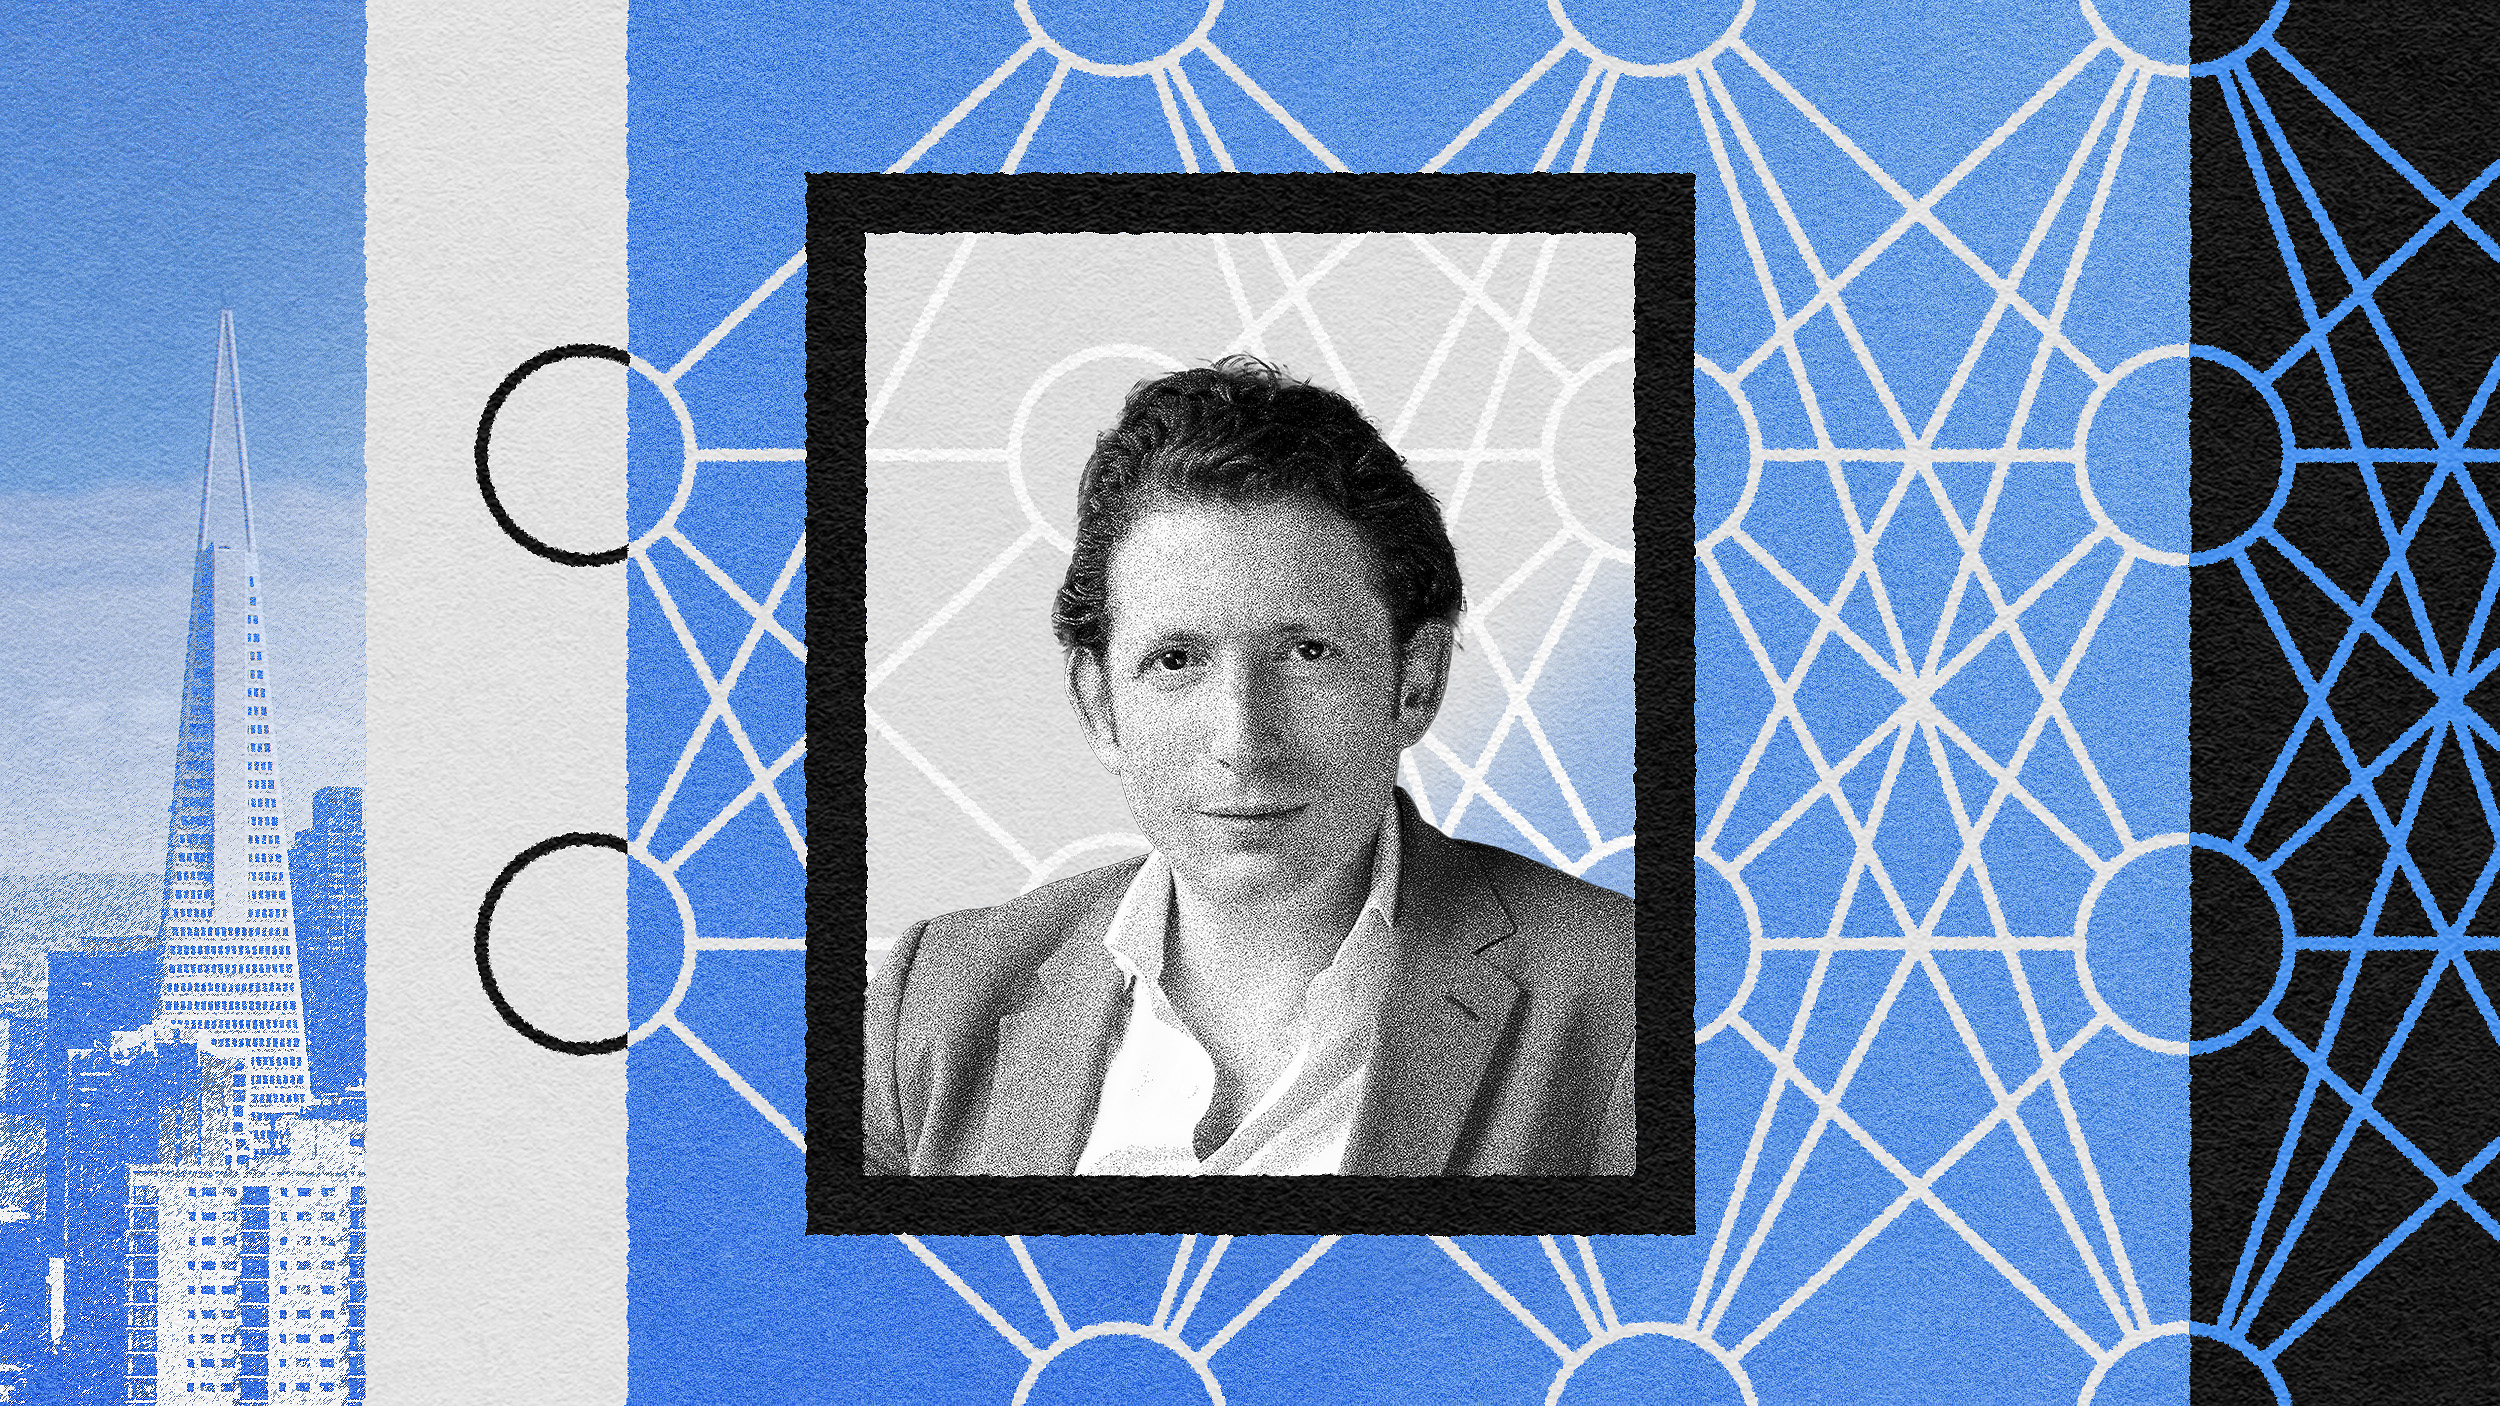 Monochrome portrait of a man with curly hair superimposed on an abstract background featuring skyscrapers, geometric patterns, and elements of machine learning marketing.